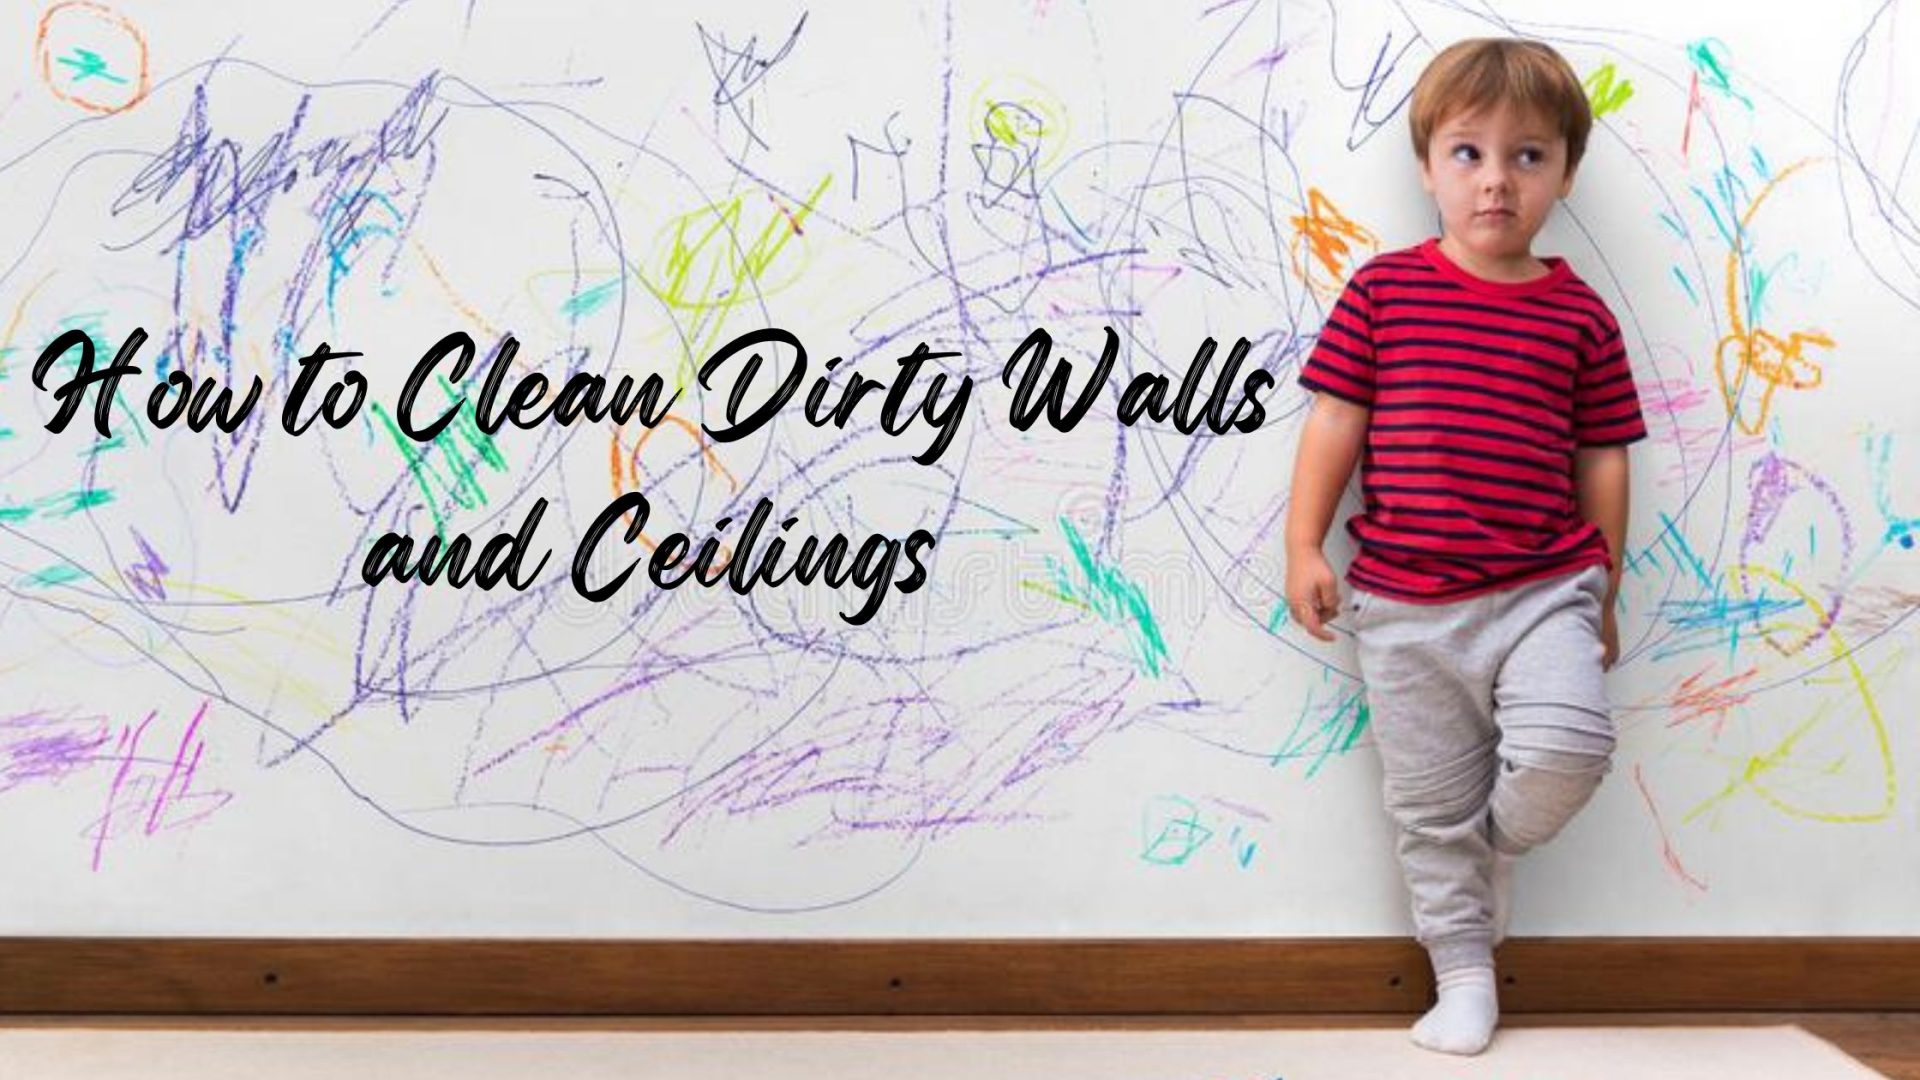 How to Clean Dirty Walls and Ceilings